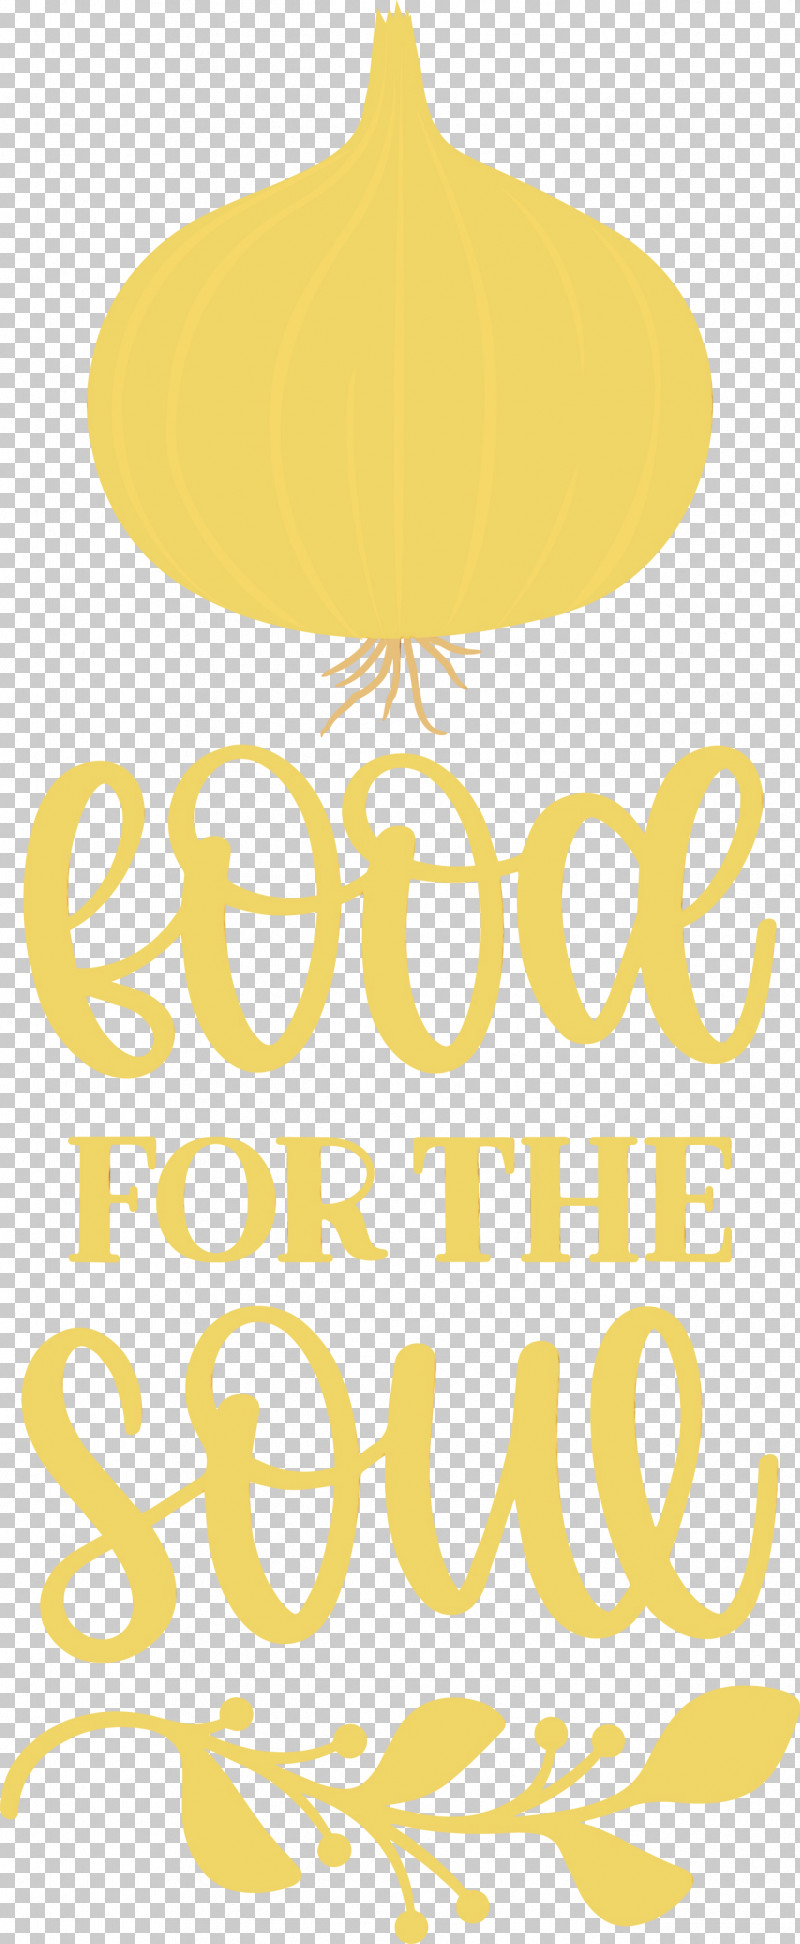 Royalty-free Poster PNG, Clipart, Cooking, Food, Paint, Poster, Royaltyfree Free PNG Download